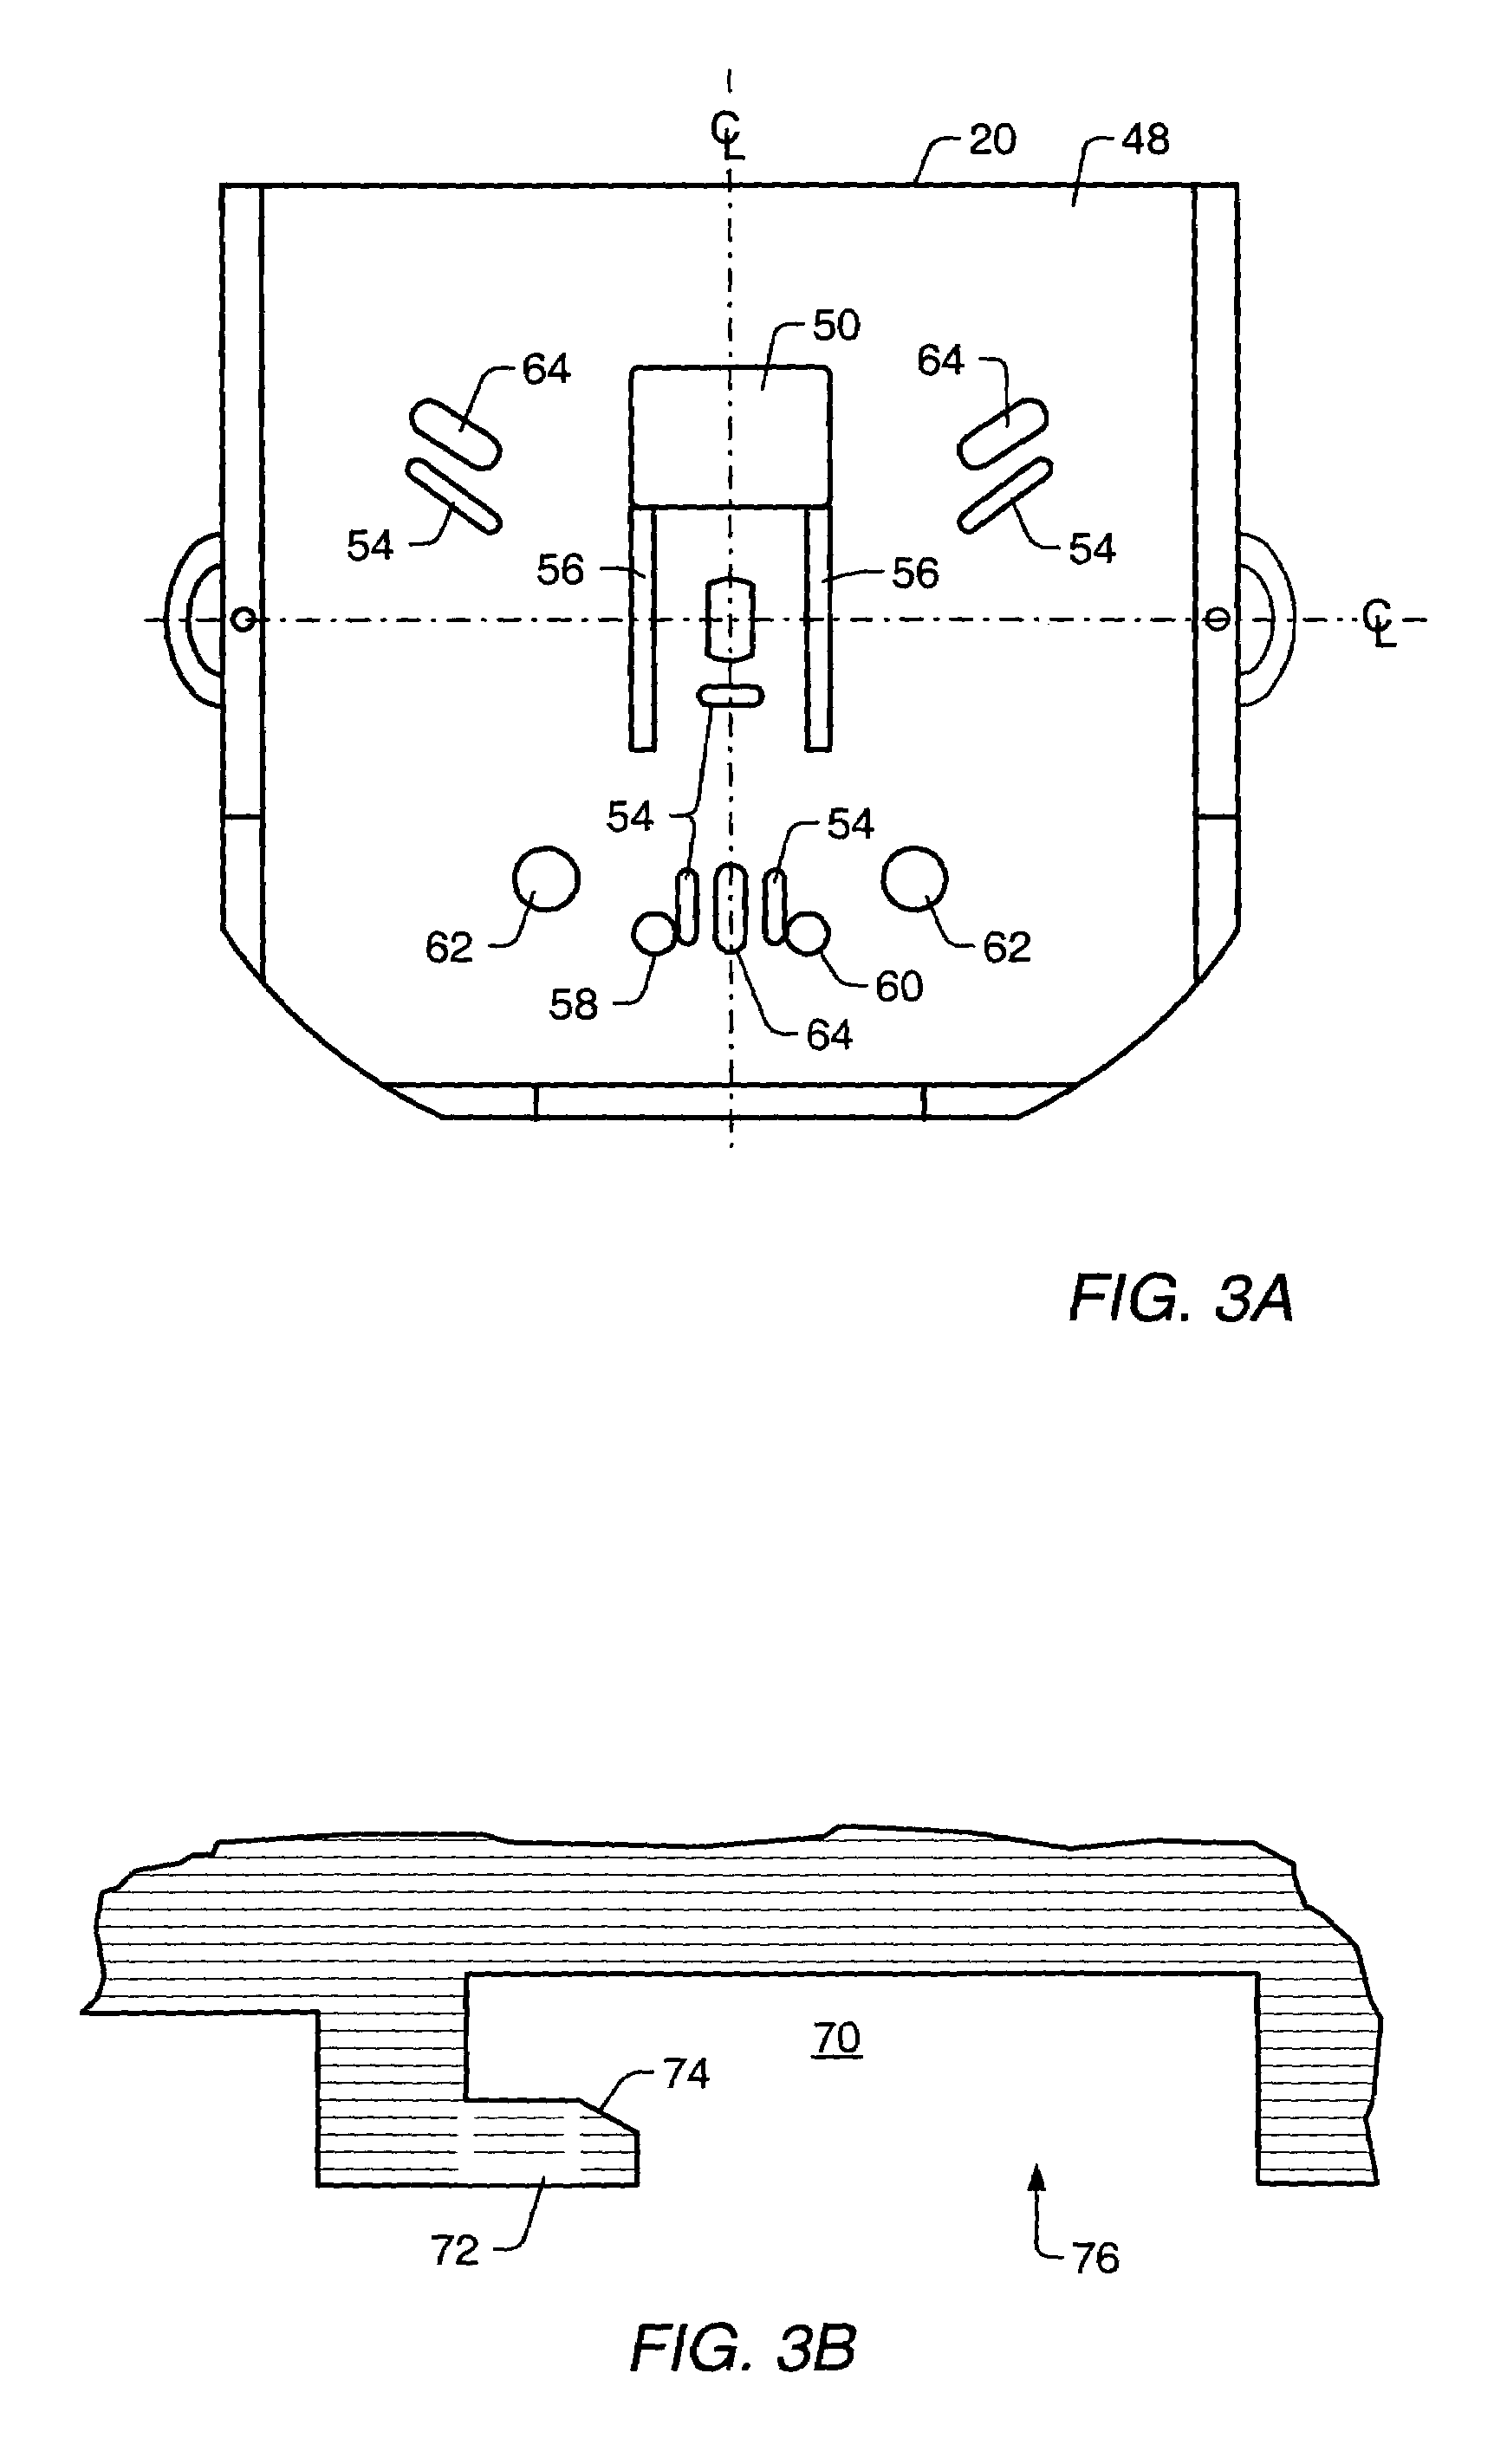 Method of interfacing ancillary equipment to FIMS processing stations